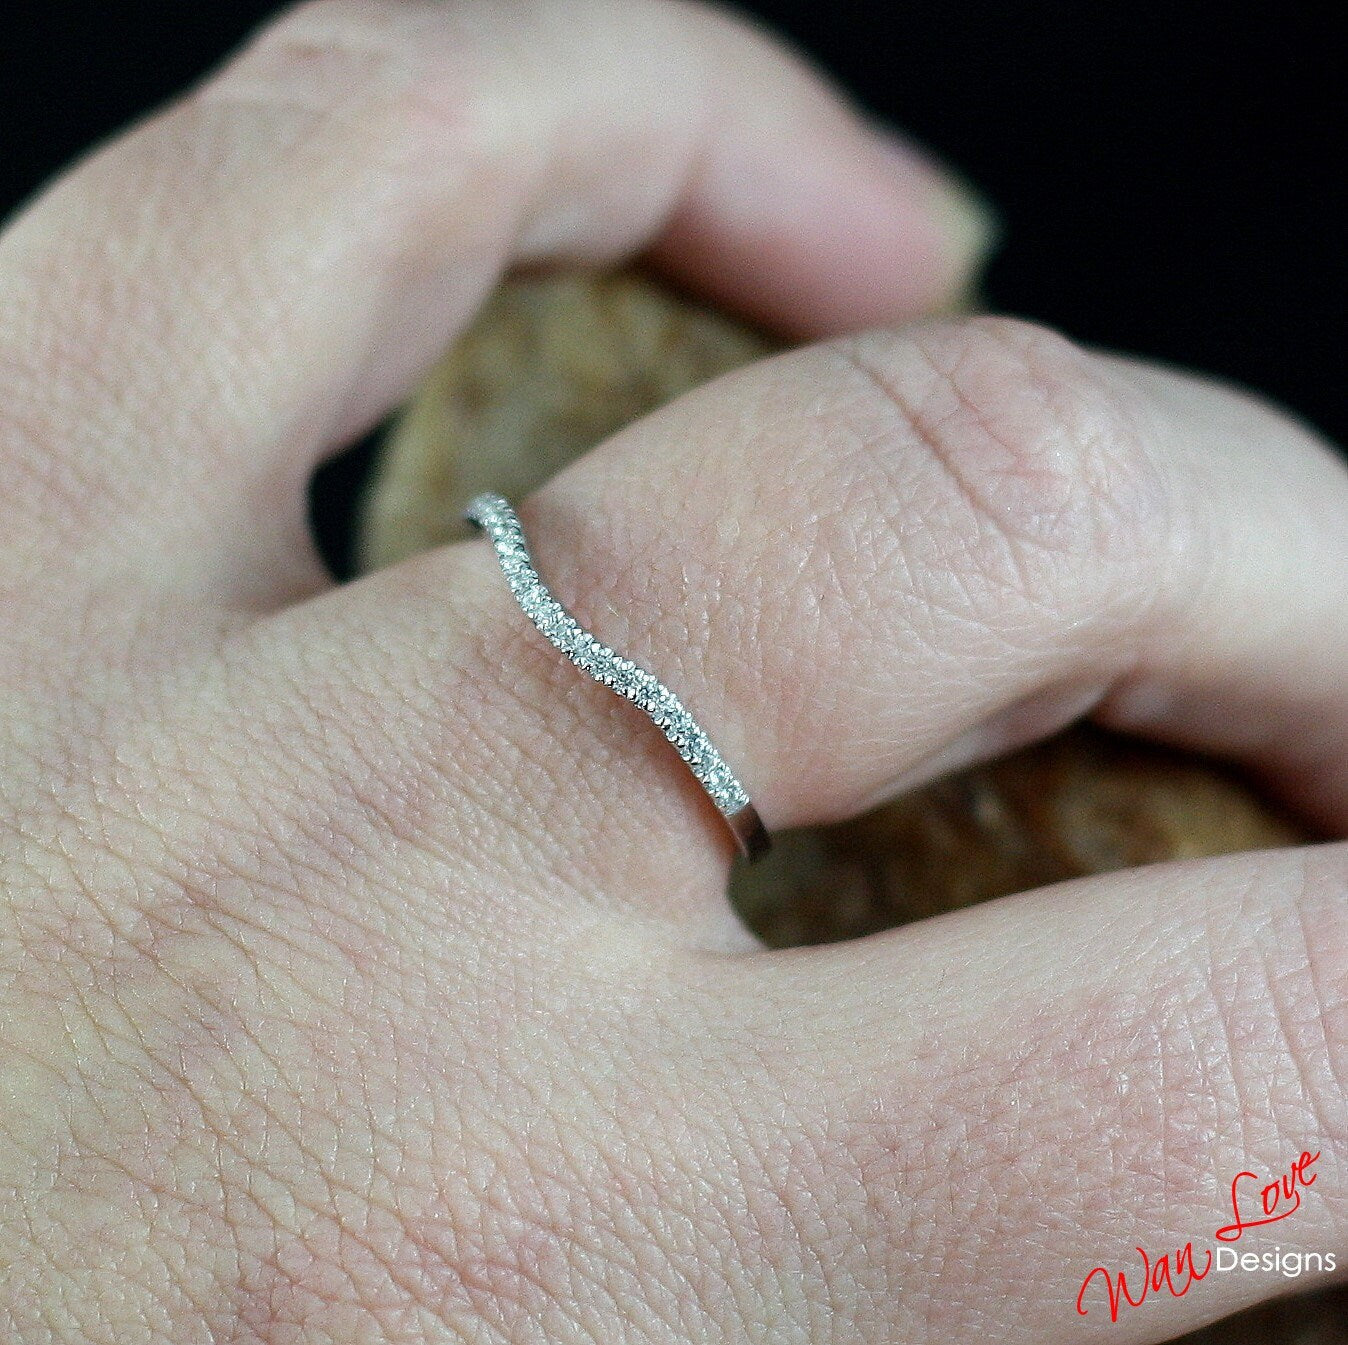 Sample Sale Ready to ship-White Sapphire Contoured Half Eternity Wedding Band-Stackable .22ct 925 Silver Rhodium-Sz 6.5-Anniversary Gift Wan Love Designs